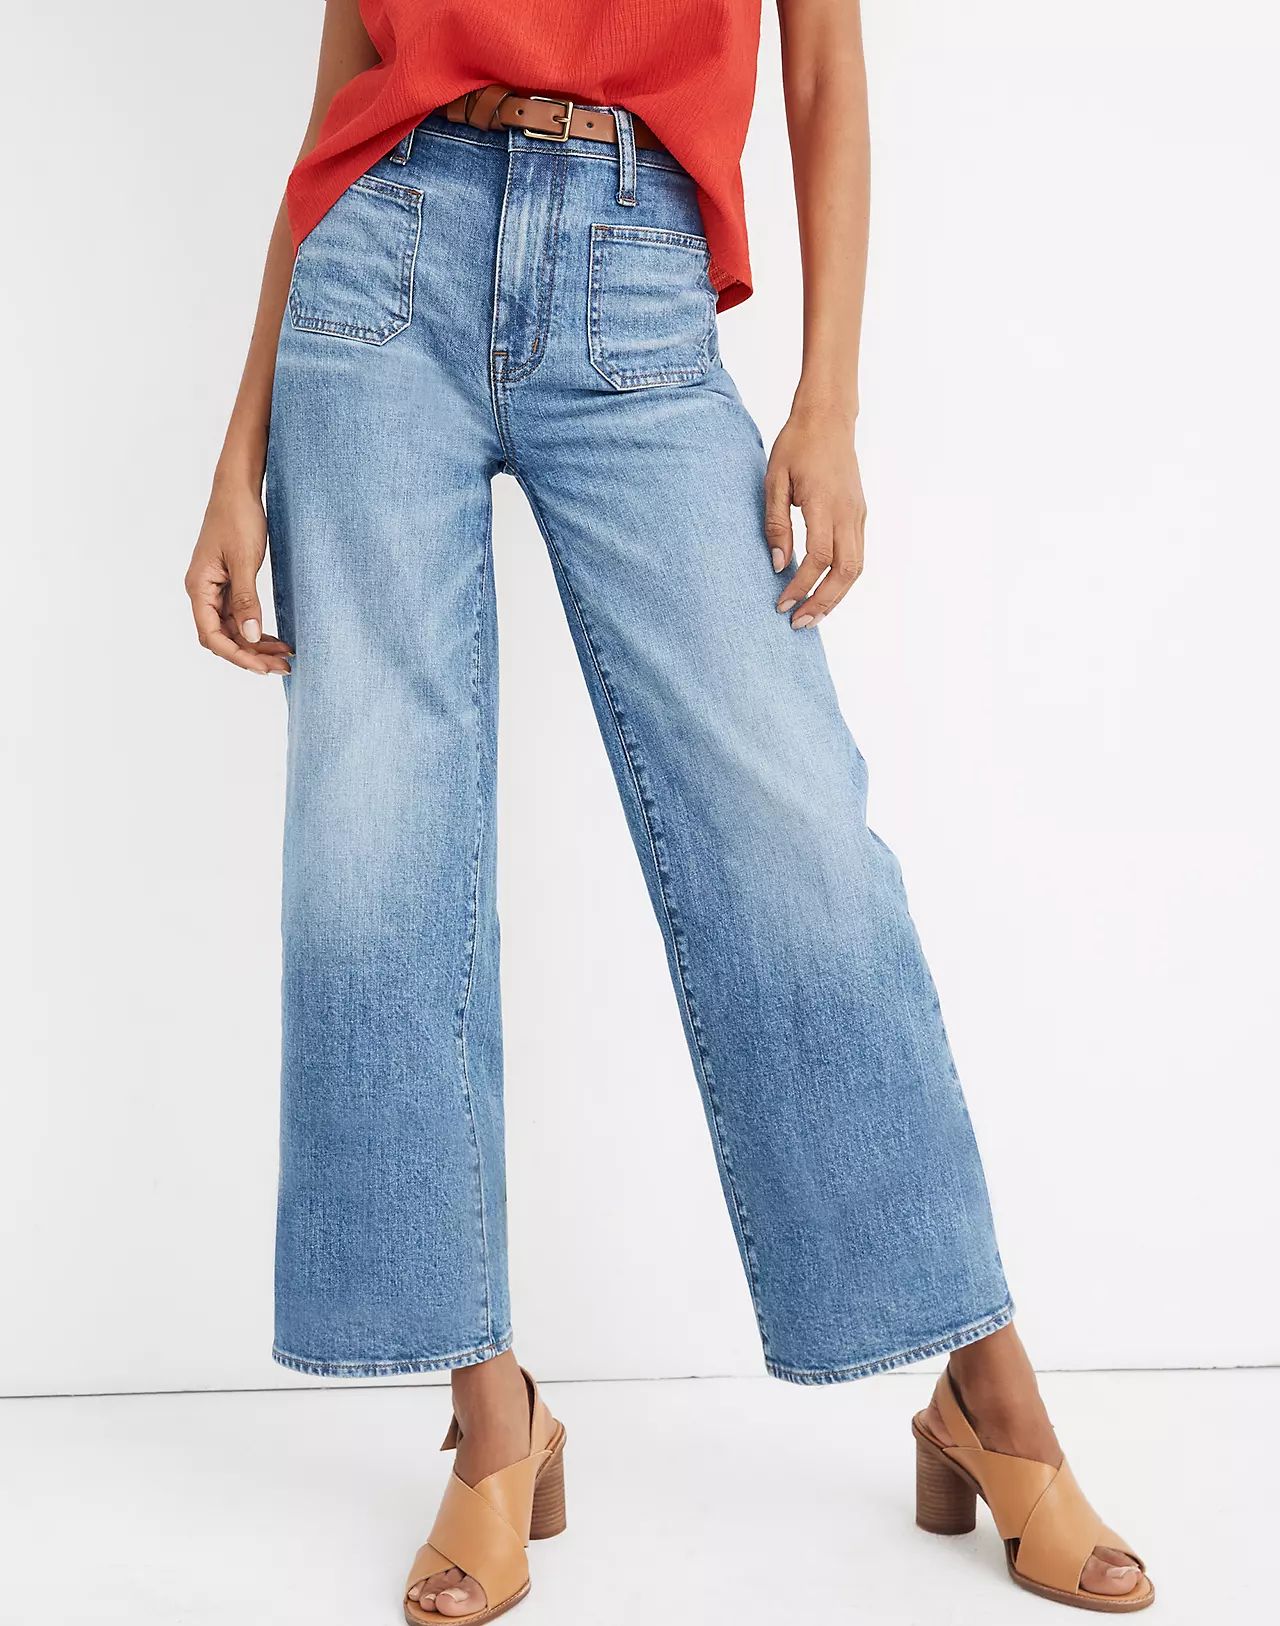 Wide-Leg Crop Jeans in Chesney Wash | Madewell